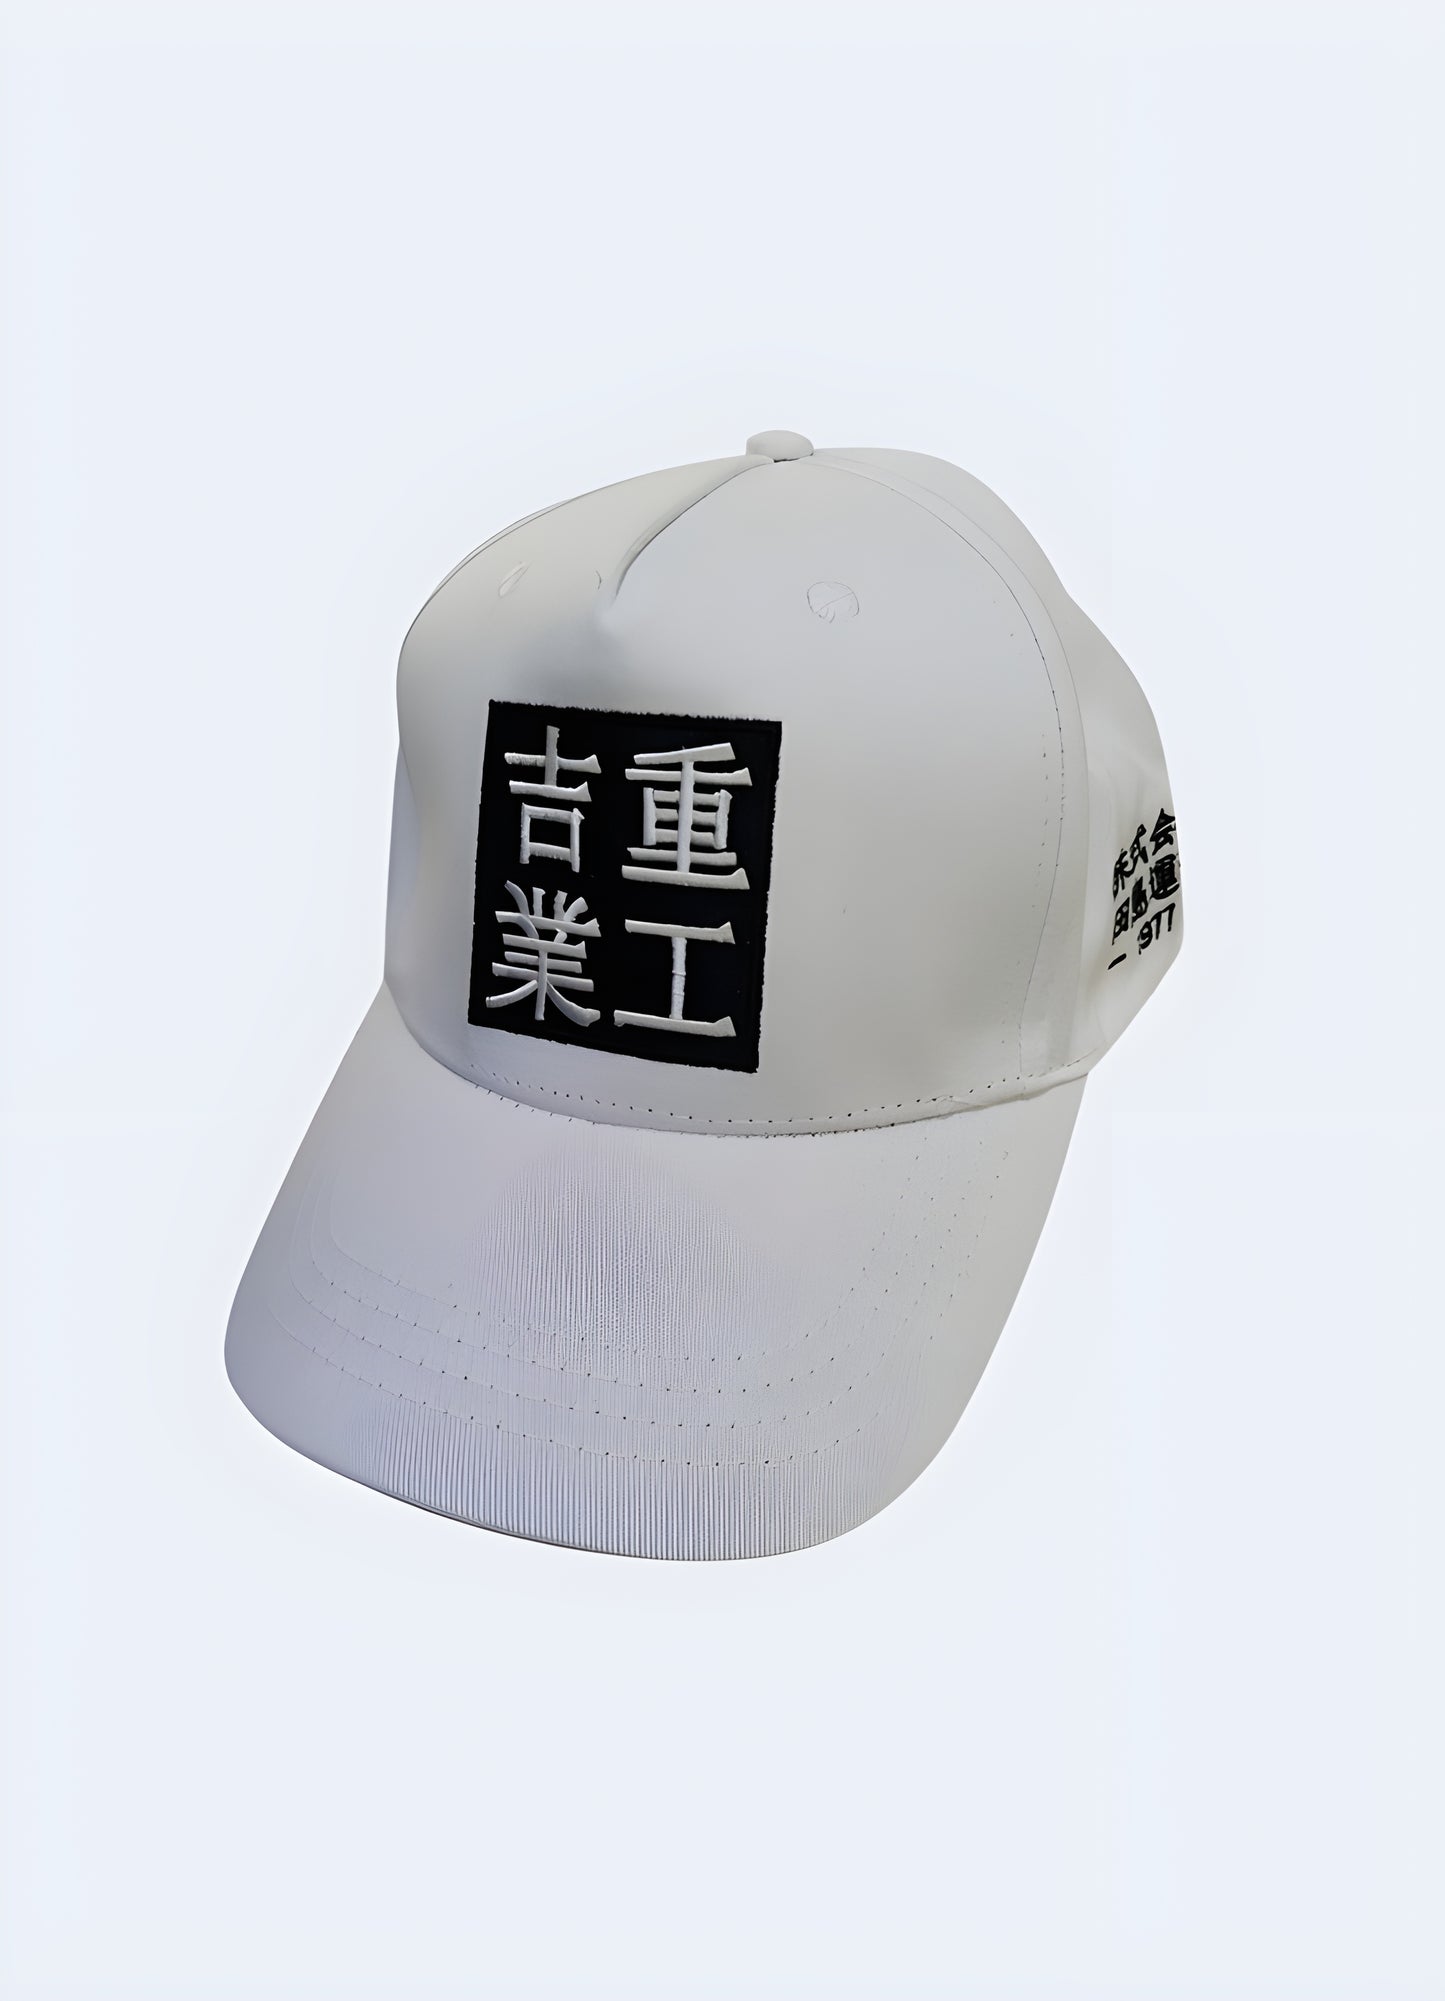 This urban headpiece, casual and elegant with Japanese Kanji letters, is more than just an accessory. 